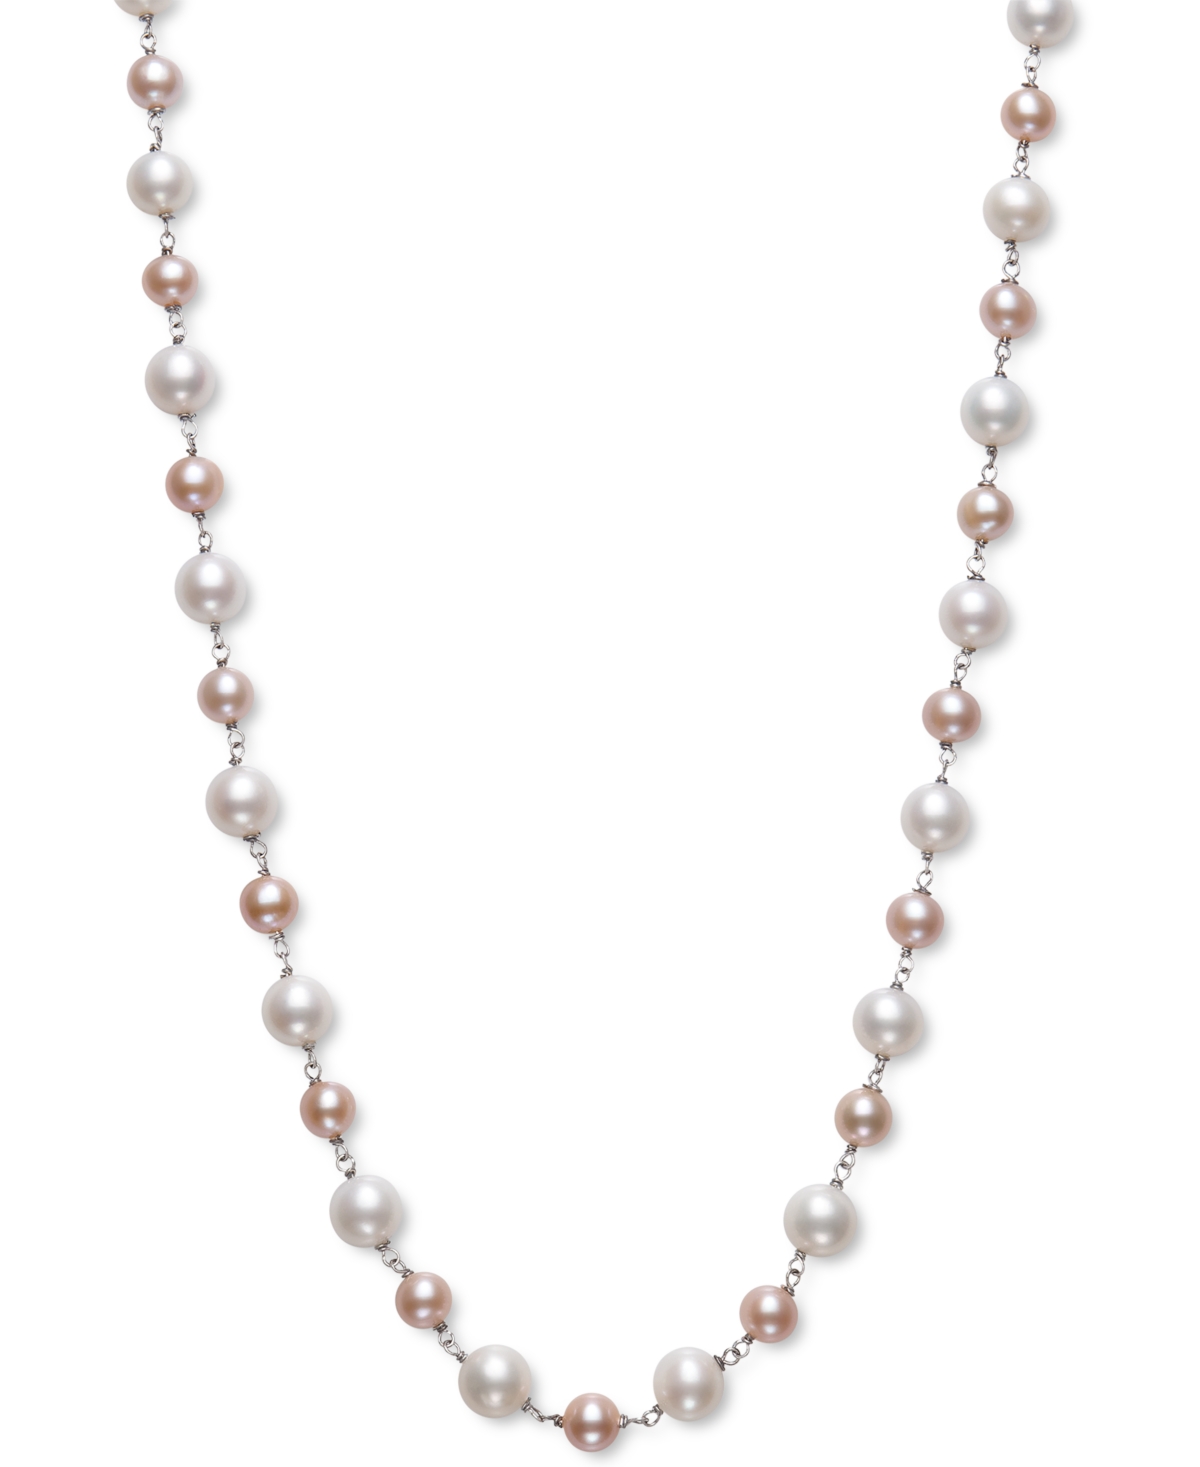 Belle de Mer Gray & White Cultured Freshwater Pearl (5-6mm & 7-8mm) Statement Necklace in Sterling Silver, 18" + 2" extender (Also in Pink & White Cultured Freshwater Pearl), Created for Macy's